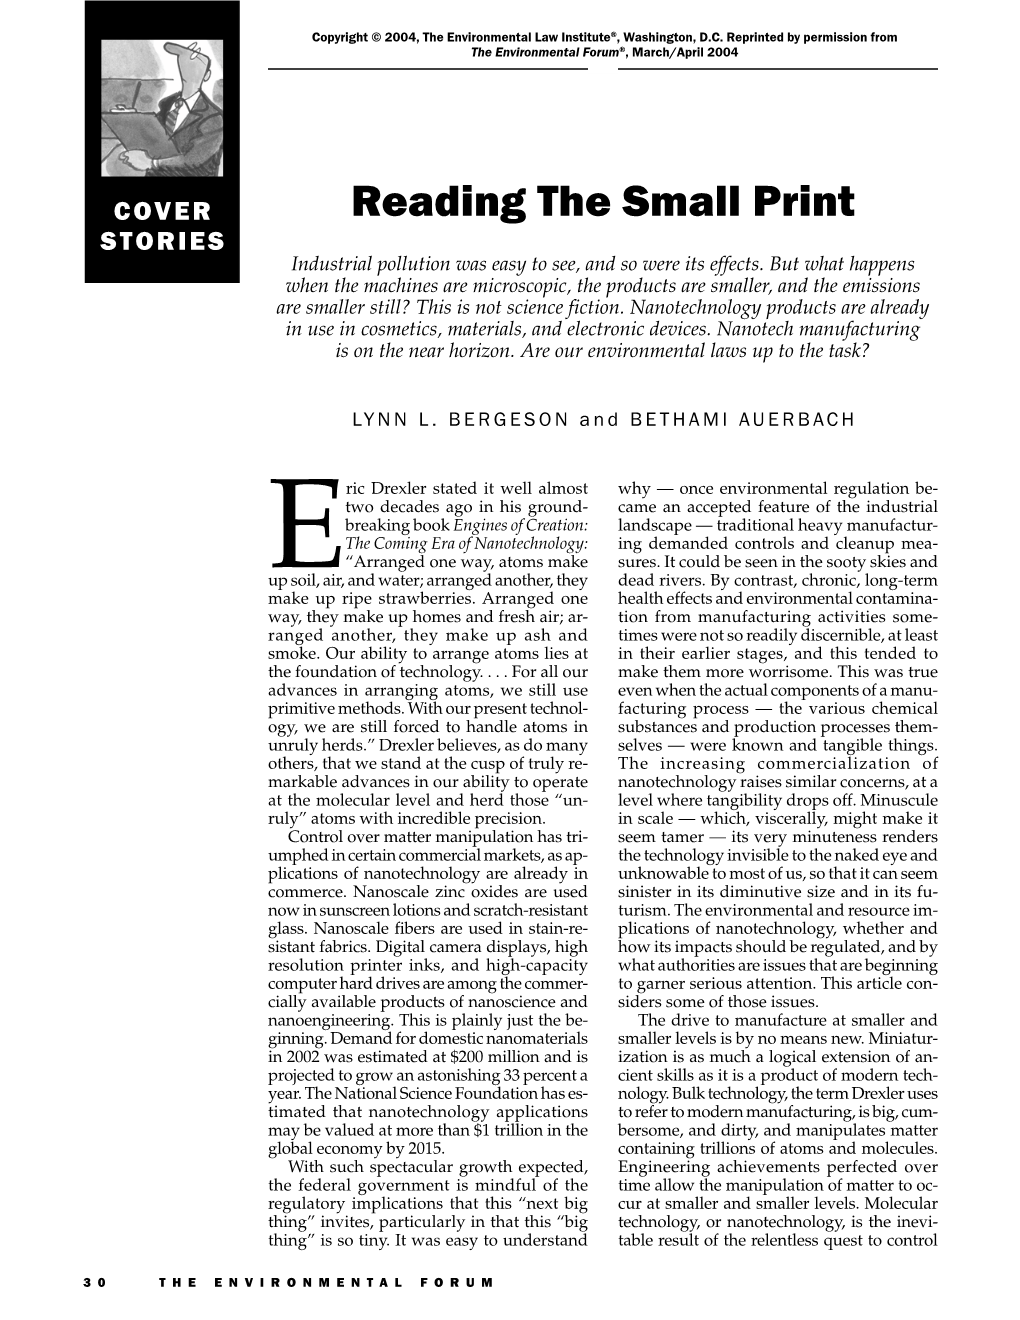 Reading the Small Print STORIES Industrial Pollution Was Easy to See, and So Were Its Effects